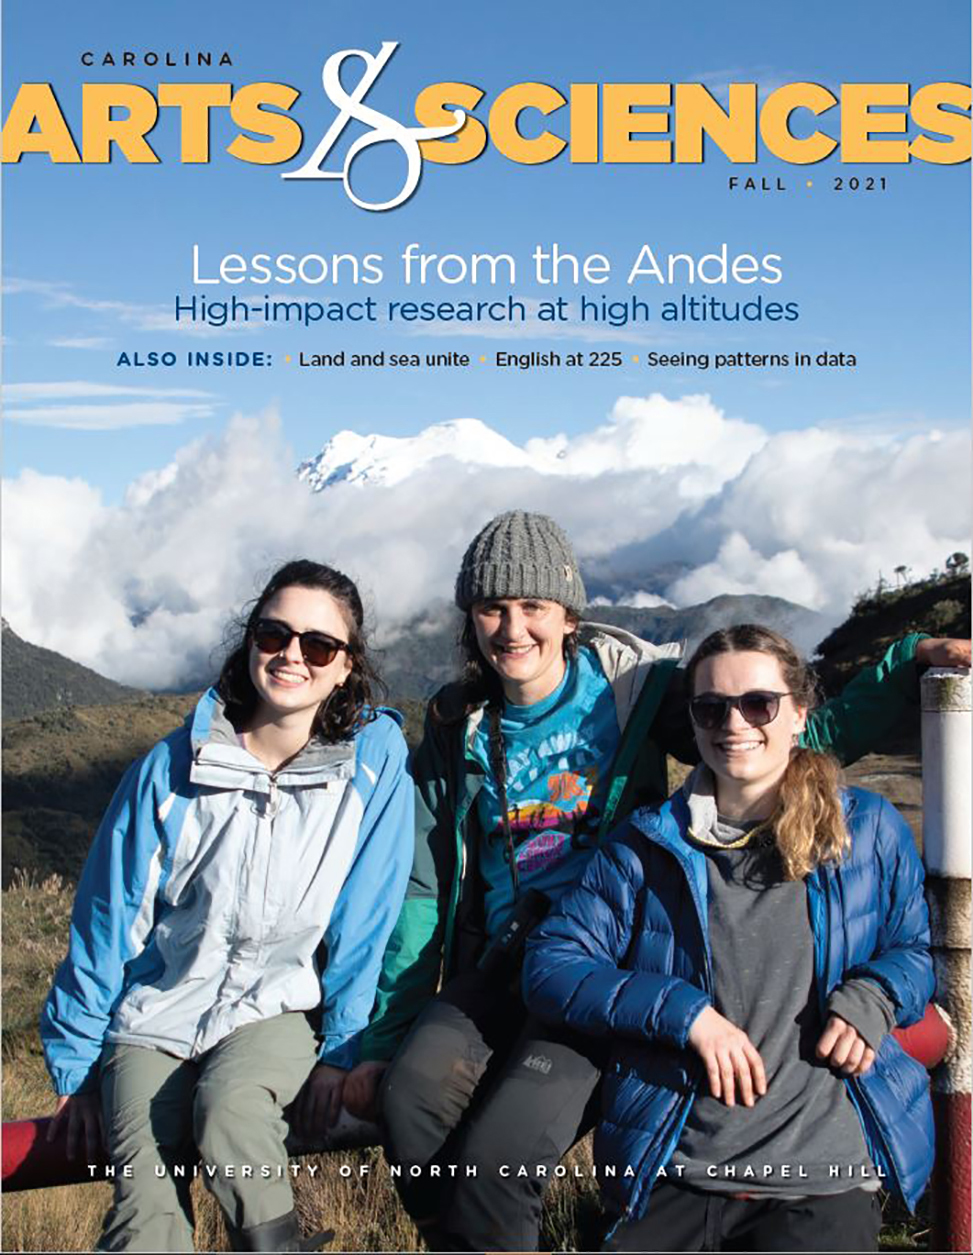 Cover of the Carolina Arts & Sciences magazine fall 2021 features three young women in Ecuador standing in front of a volcano. The text on the cover reads: Lessons from the Andes: High-impact research at high altitudes. ALSO INSIDE: Land and sea unite, English at 225, Seeing patterns in data.